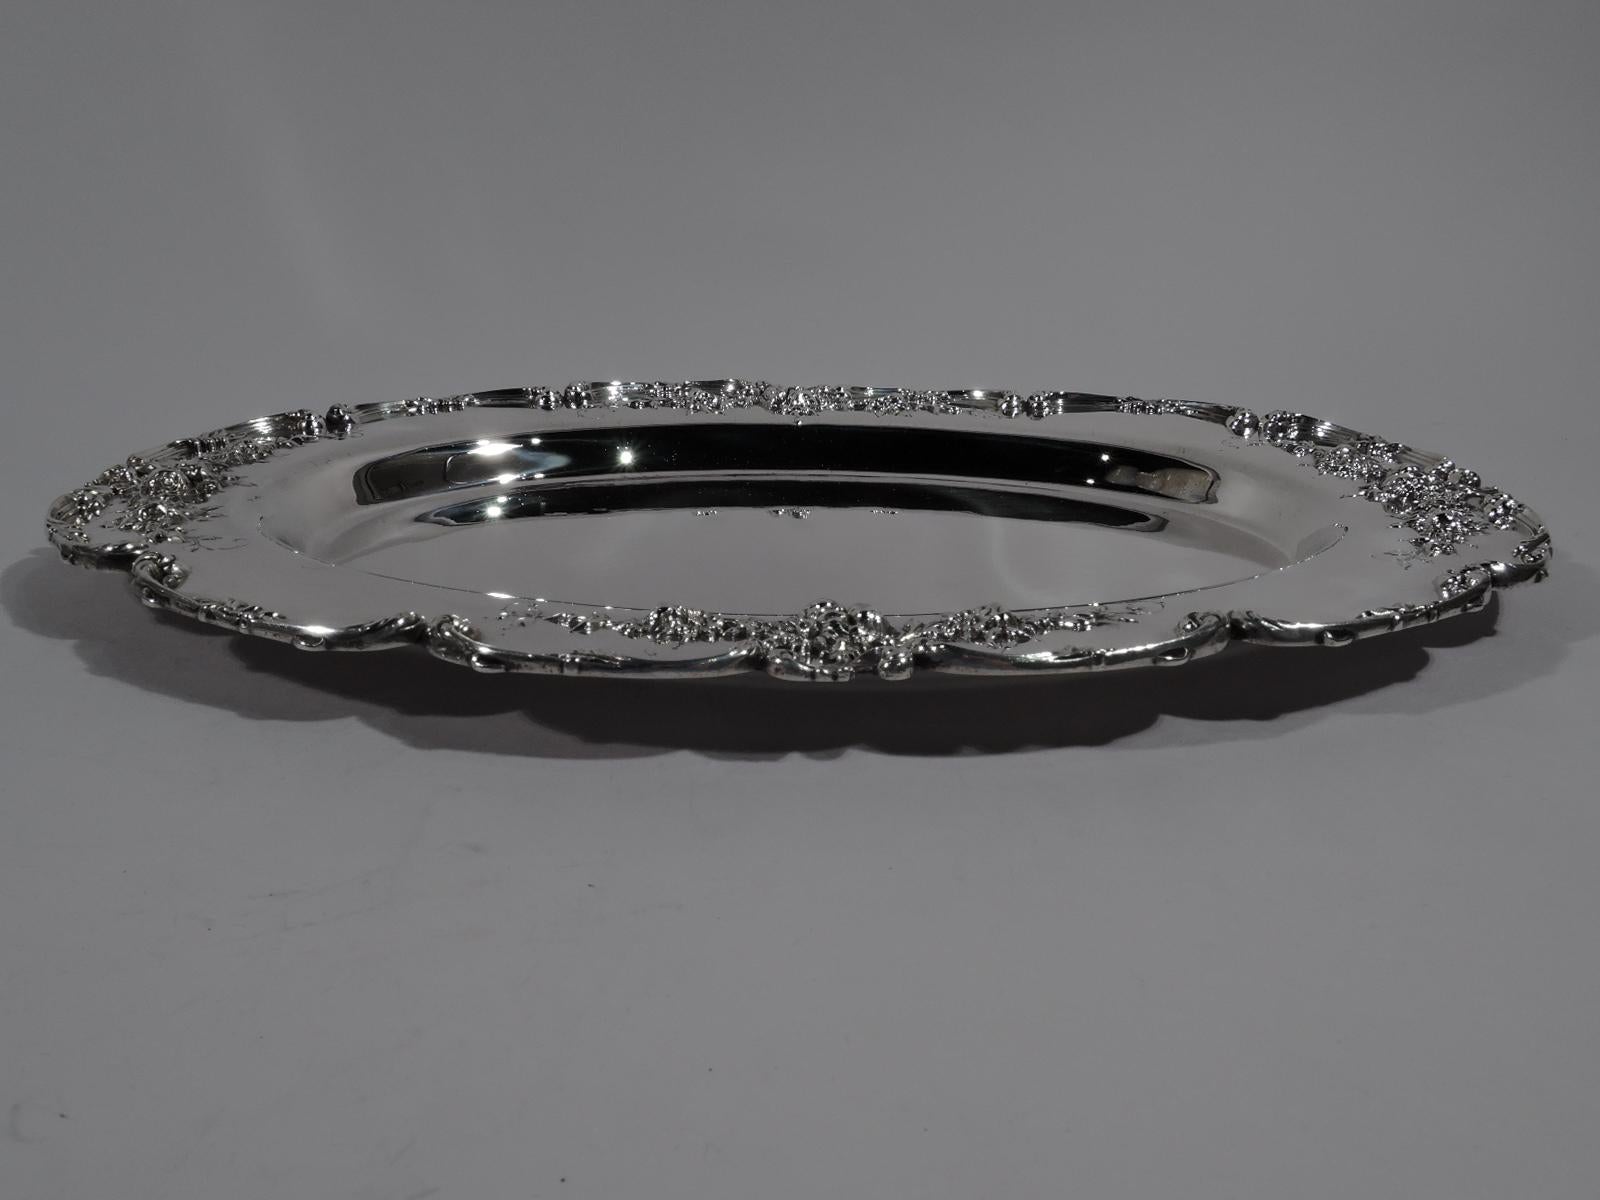 Turn-of-the-century American Art Nouveau sterling silver tray. Deep and oval well. Wide shoulder with applied floral garlands. Scalloped rim with applied c-scrolls. Tactile with nice heft. Fully marked including retailer’s stamp for JB Hudson & Son